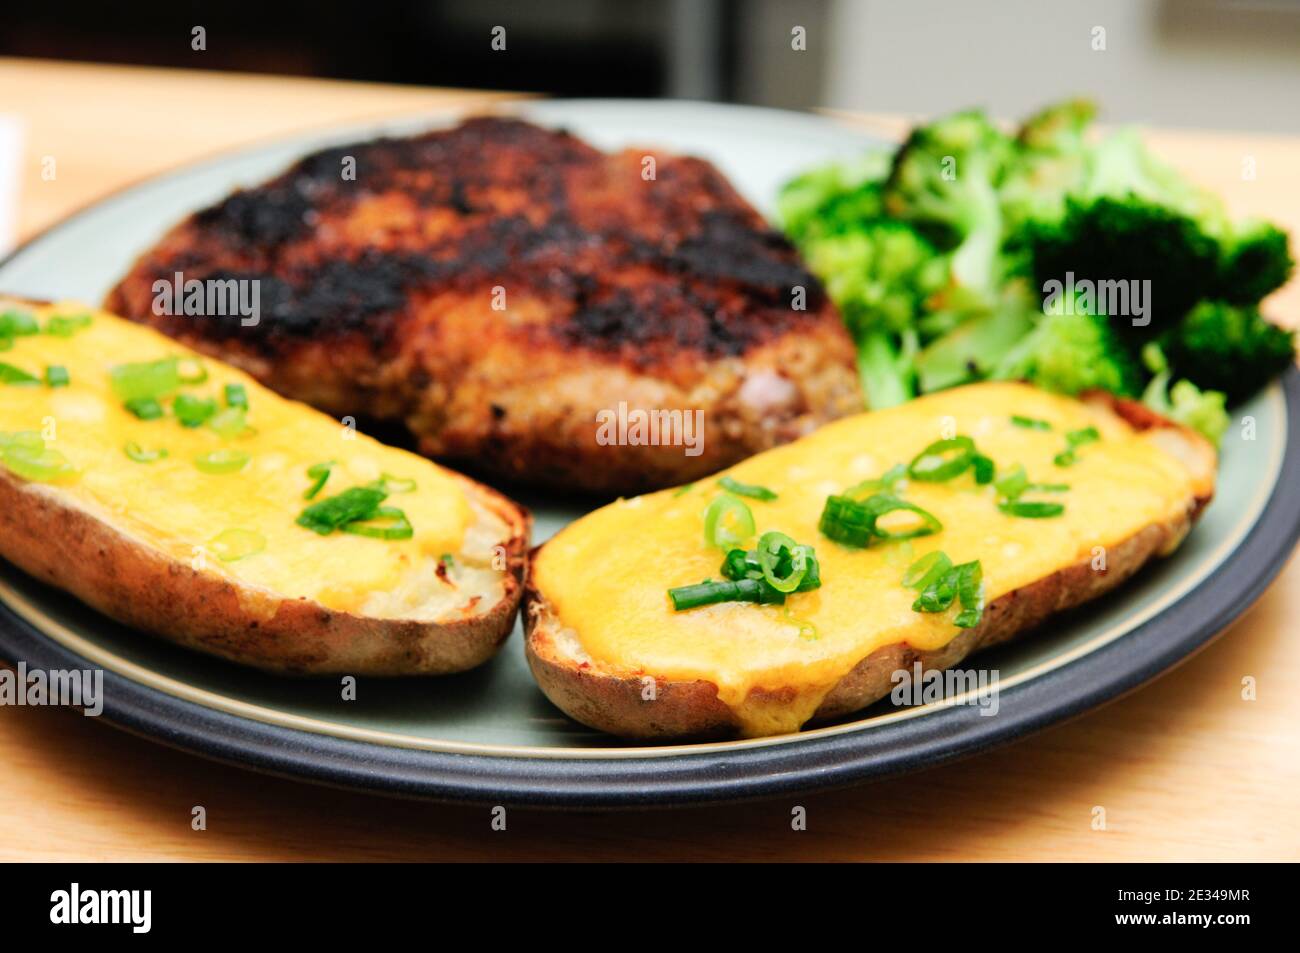 Closeup shot of tasty meat and potatoes with cheese and greens Stock Photo